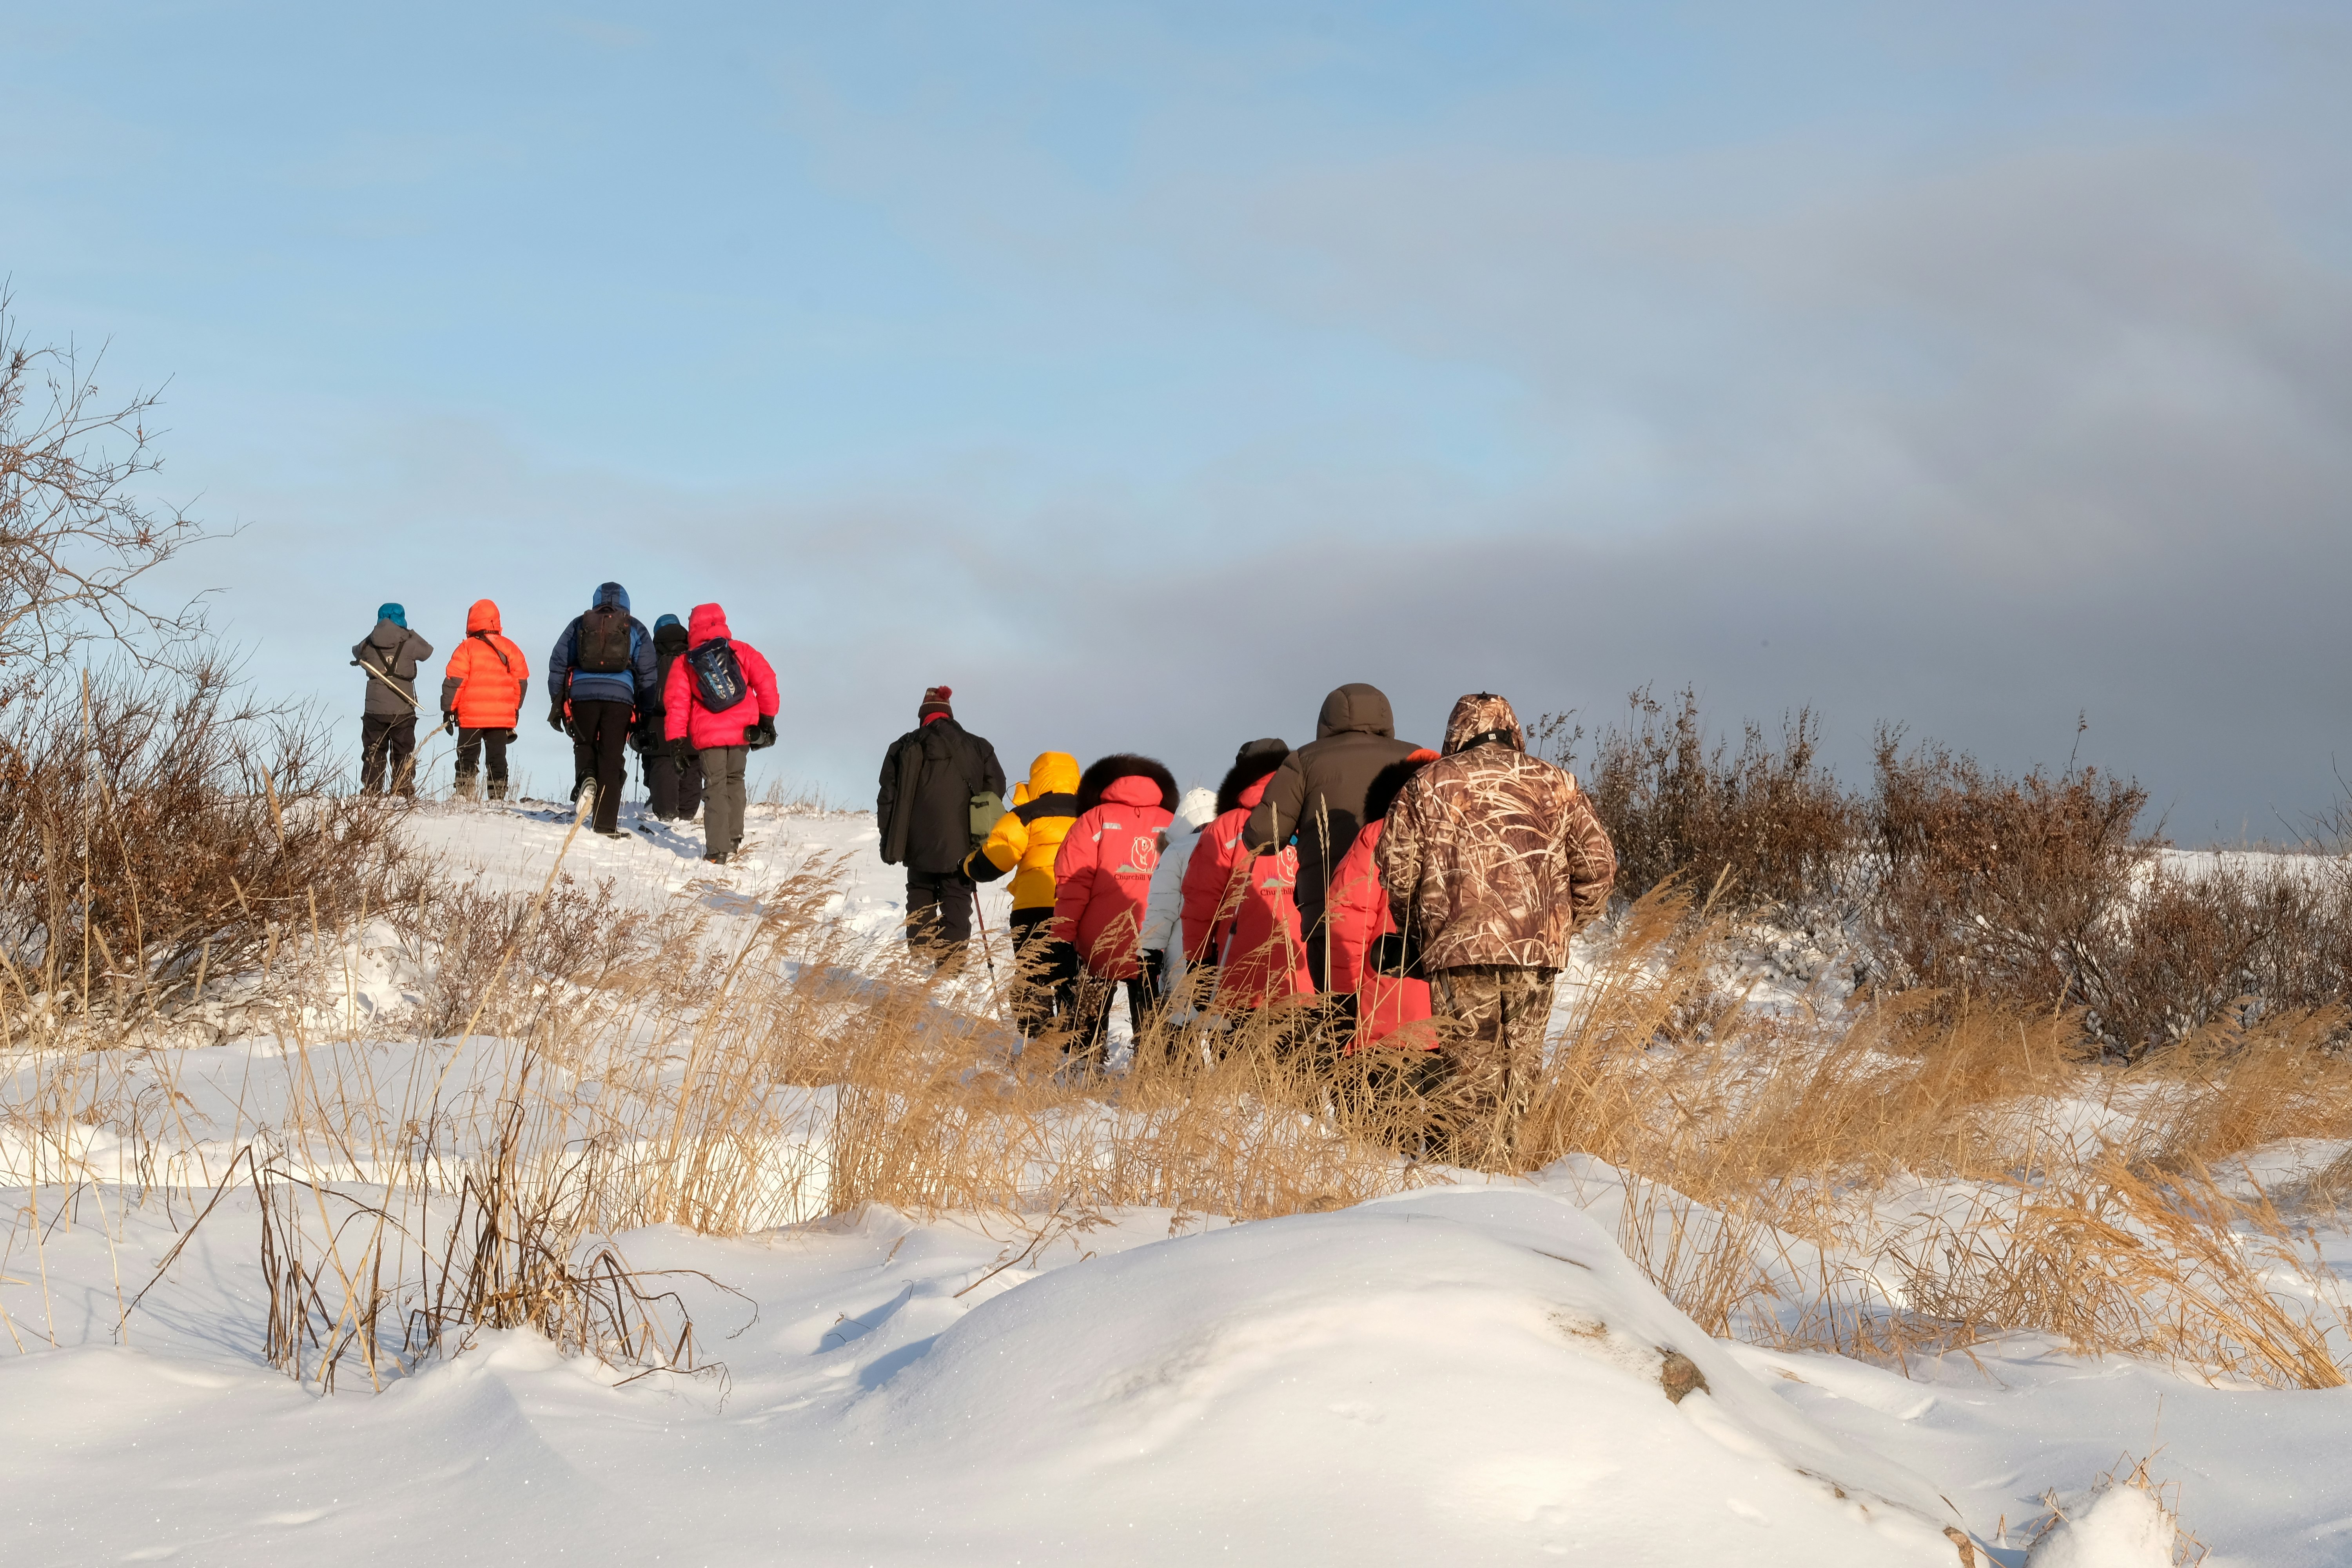 A group of people all wearing colorful padded winter clothing walk in single file over snowy ground